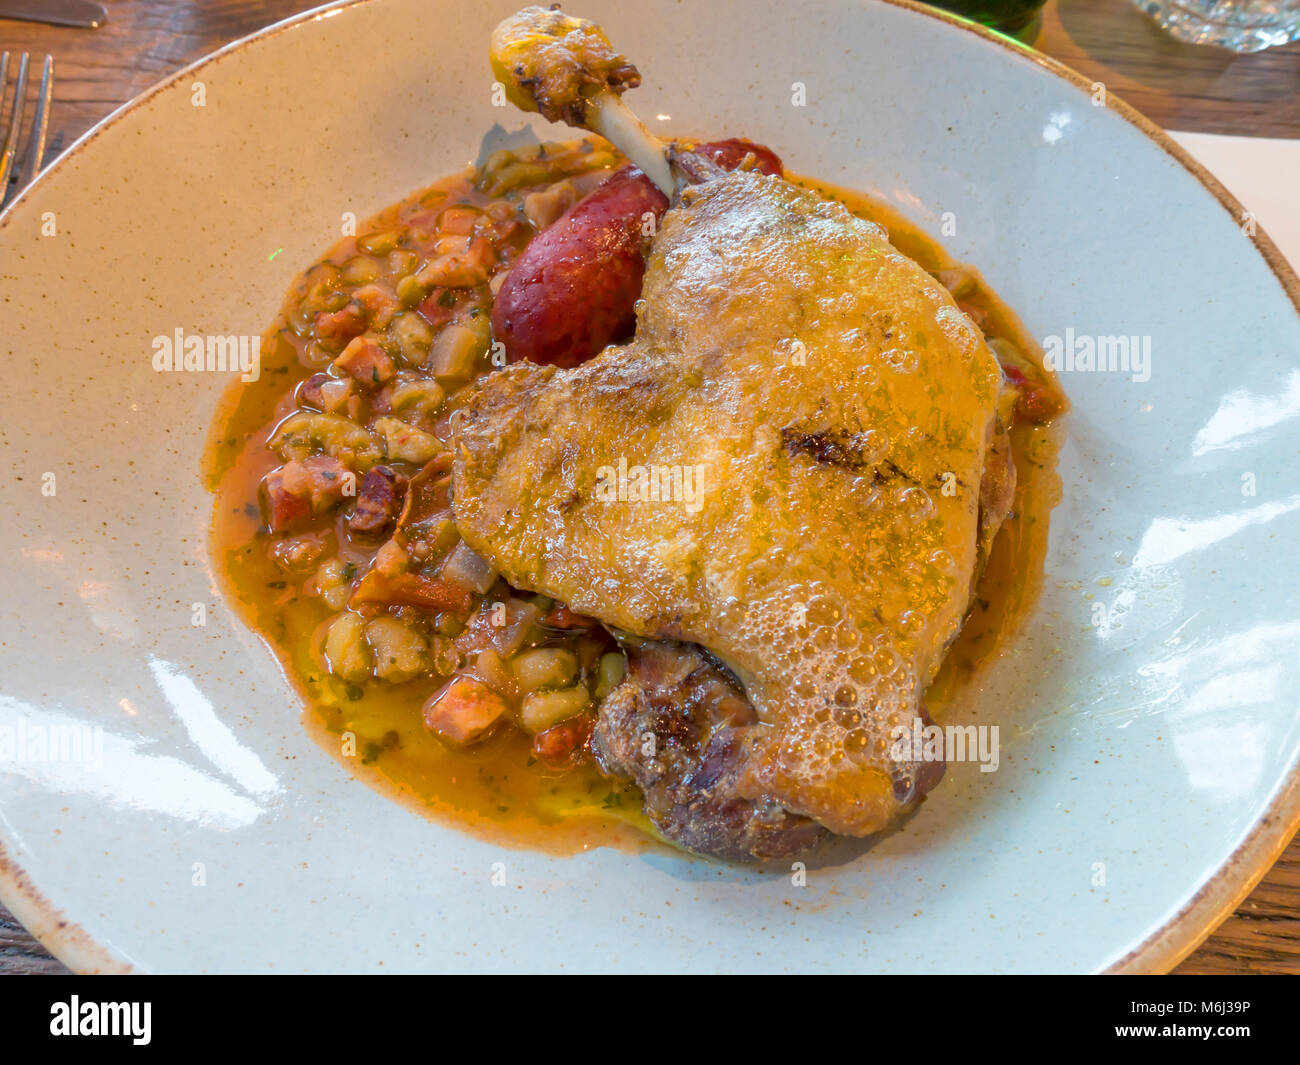 Lunch of duck leg confit with a cassoulet of Toulouse sausage, smoked bacon, flageolet beans and plum tomatoes Stock Photo